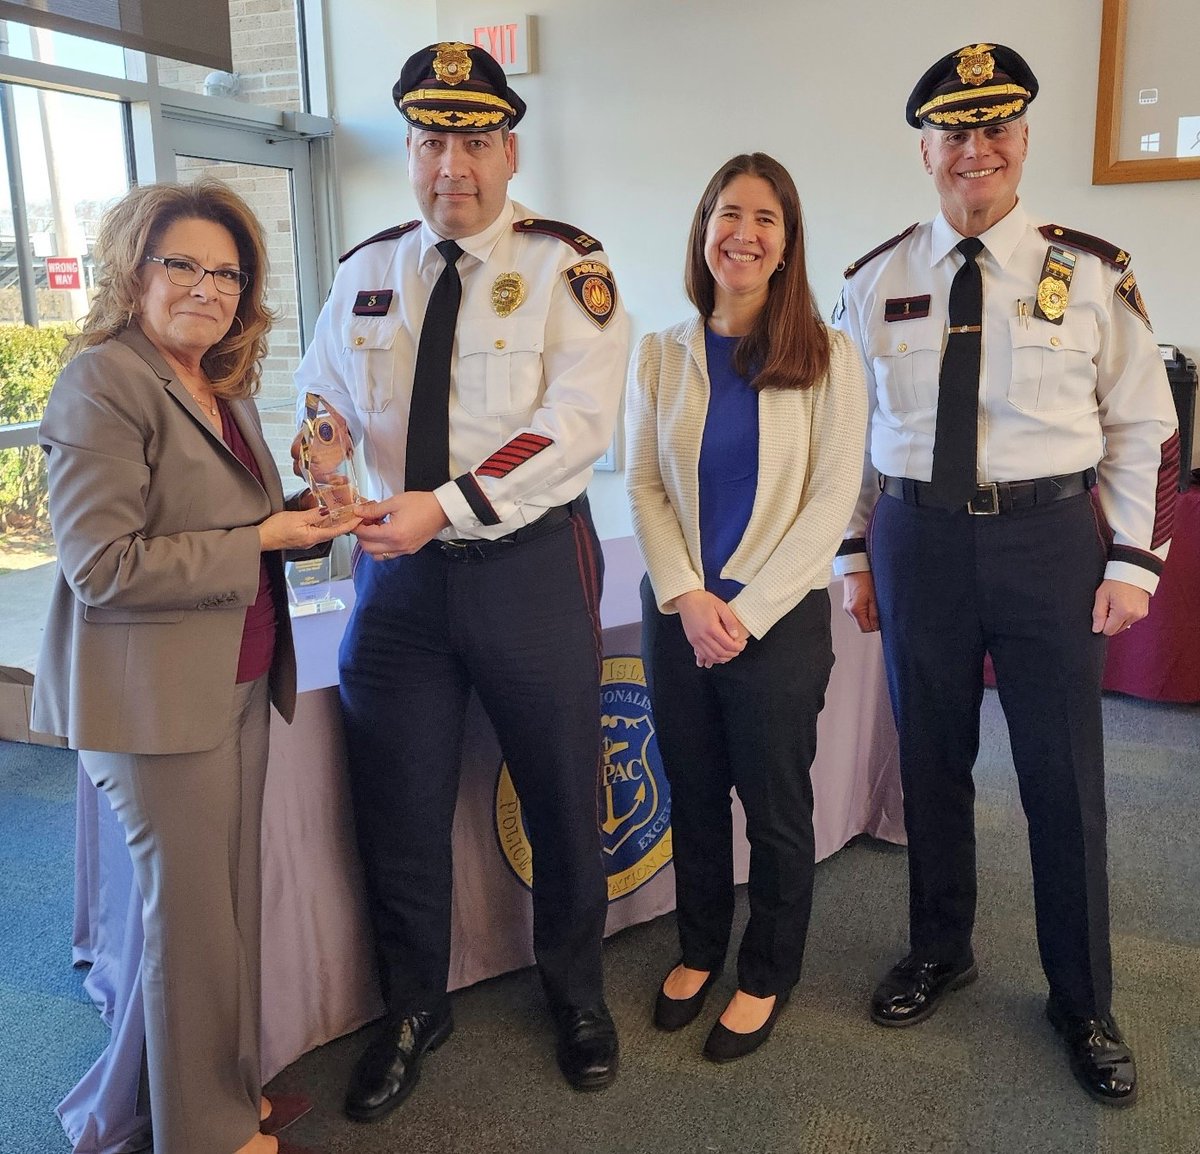 Congratulations to Capt. Joseph Acampora of RIC Campus Police, who received this year's Accreditation Manager of the Year Award from the RI Police Accreditation Commission! #RICNews @James_Mendonca